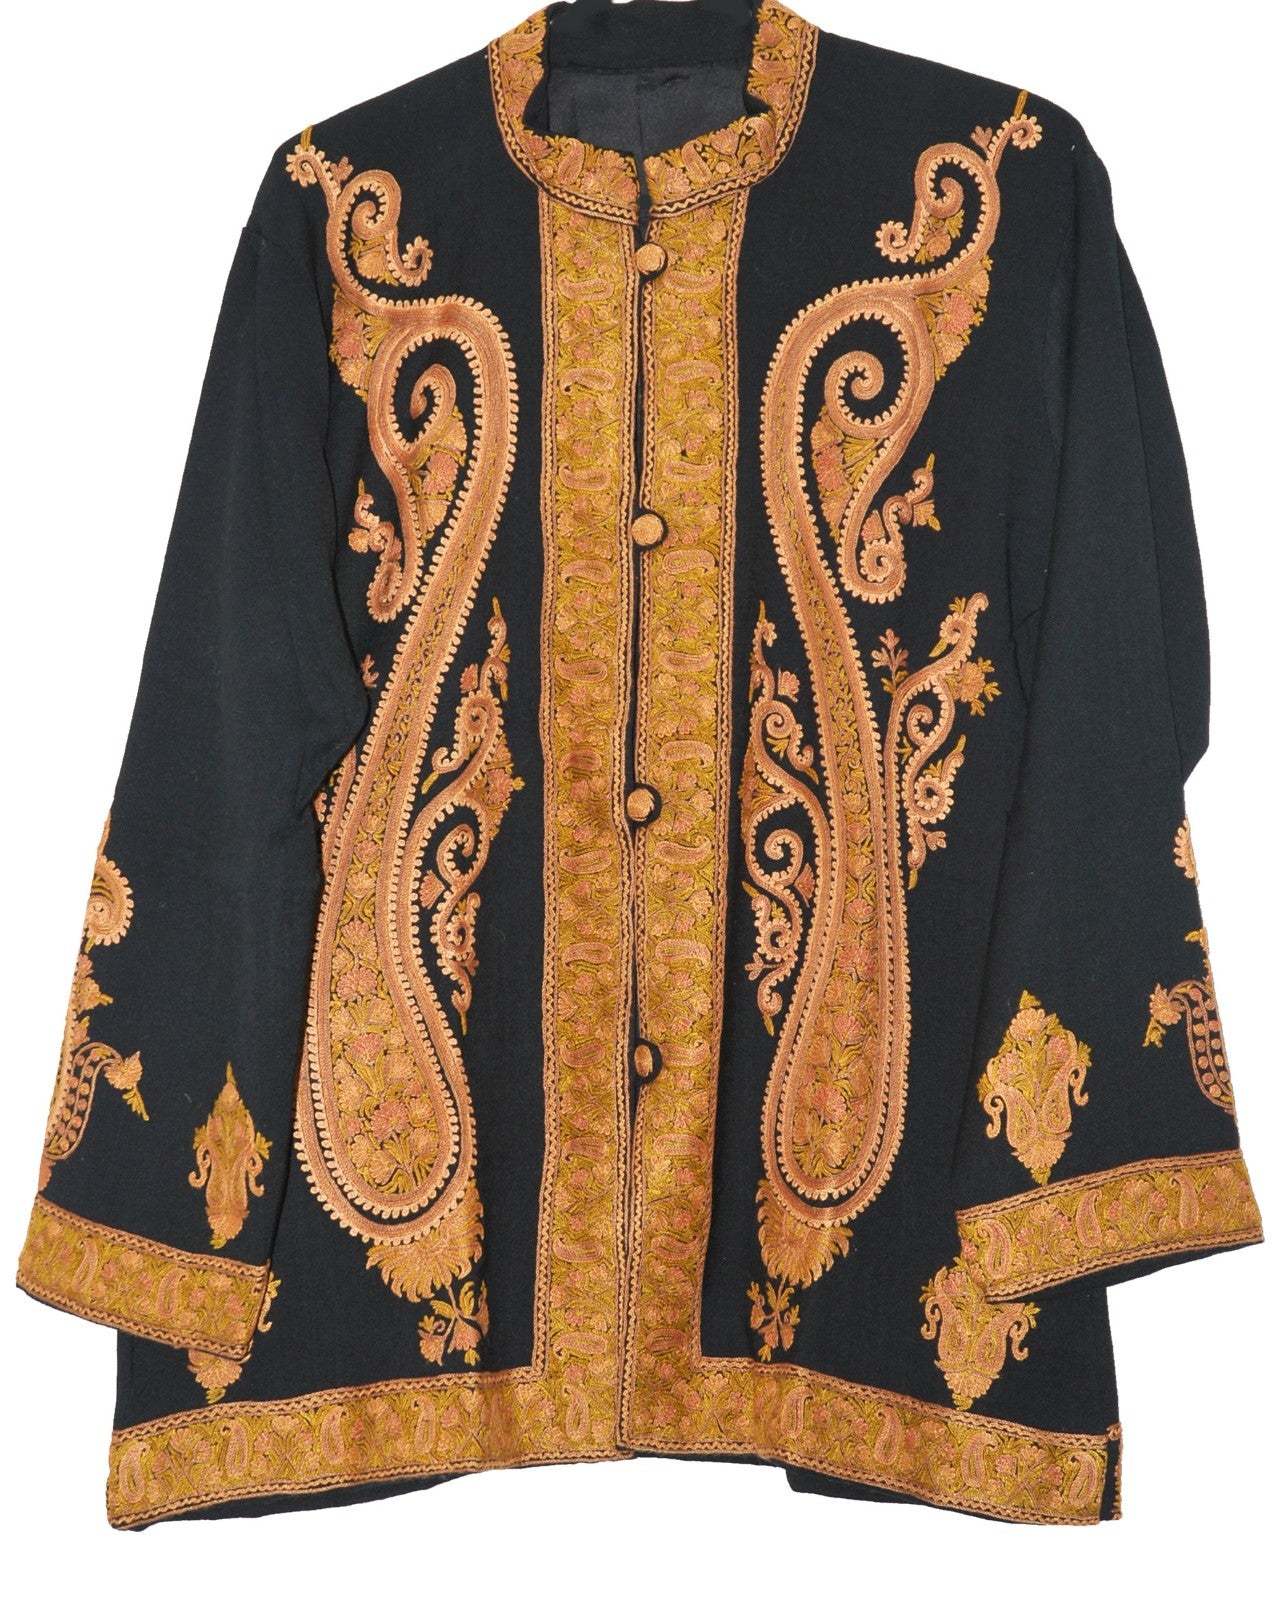 Embroidered Woolen Jacket Black, Rust and Olive Embroidery #AO-024